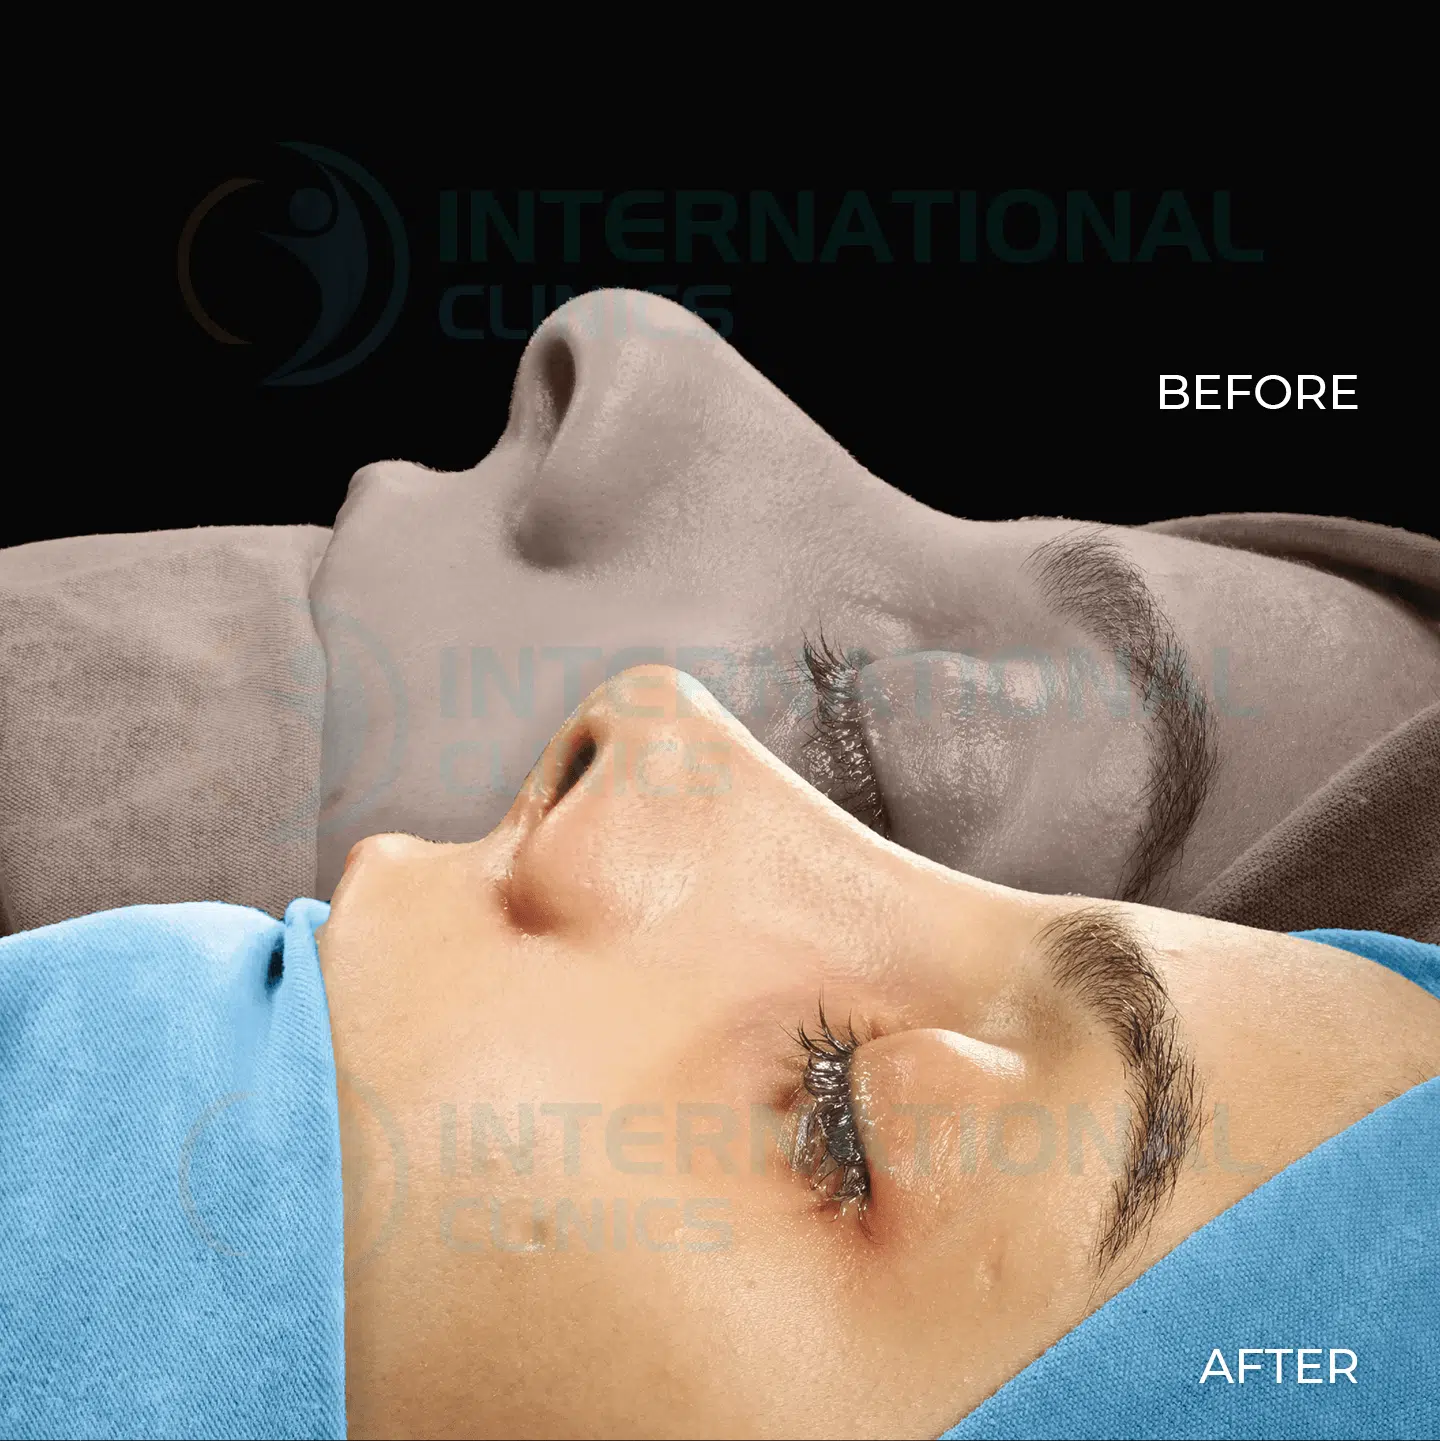 Ethnic nose job Before and After image